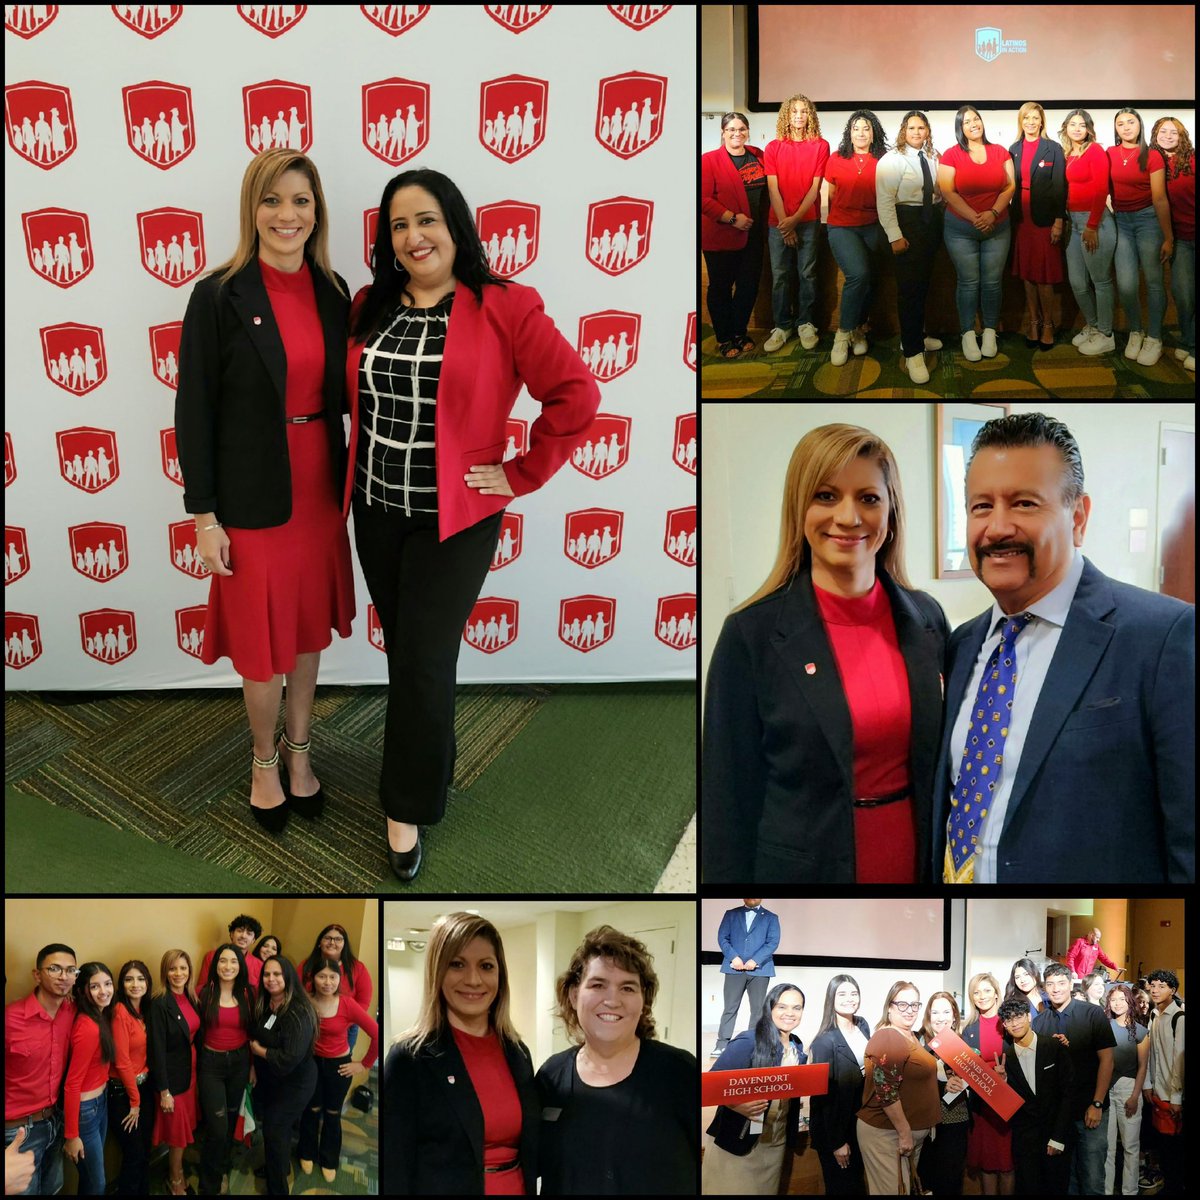 I am beyond proud and impressed with the @latinosinacti0n students & teachers from @PolkSchoolsNews. It was extremely heartwarming to reconnect with them all at the annual #LIA Leadership Conference at @USF. Gracias LIA for the invitation, and great keynote address @RPMontanez.